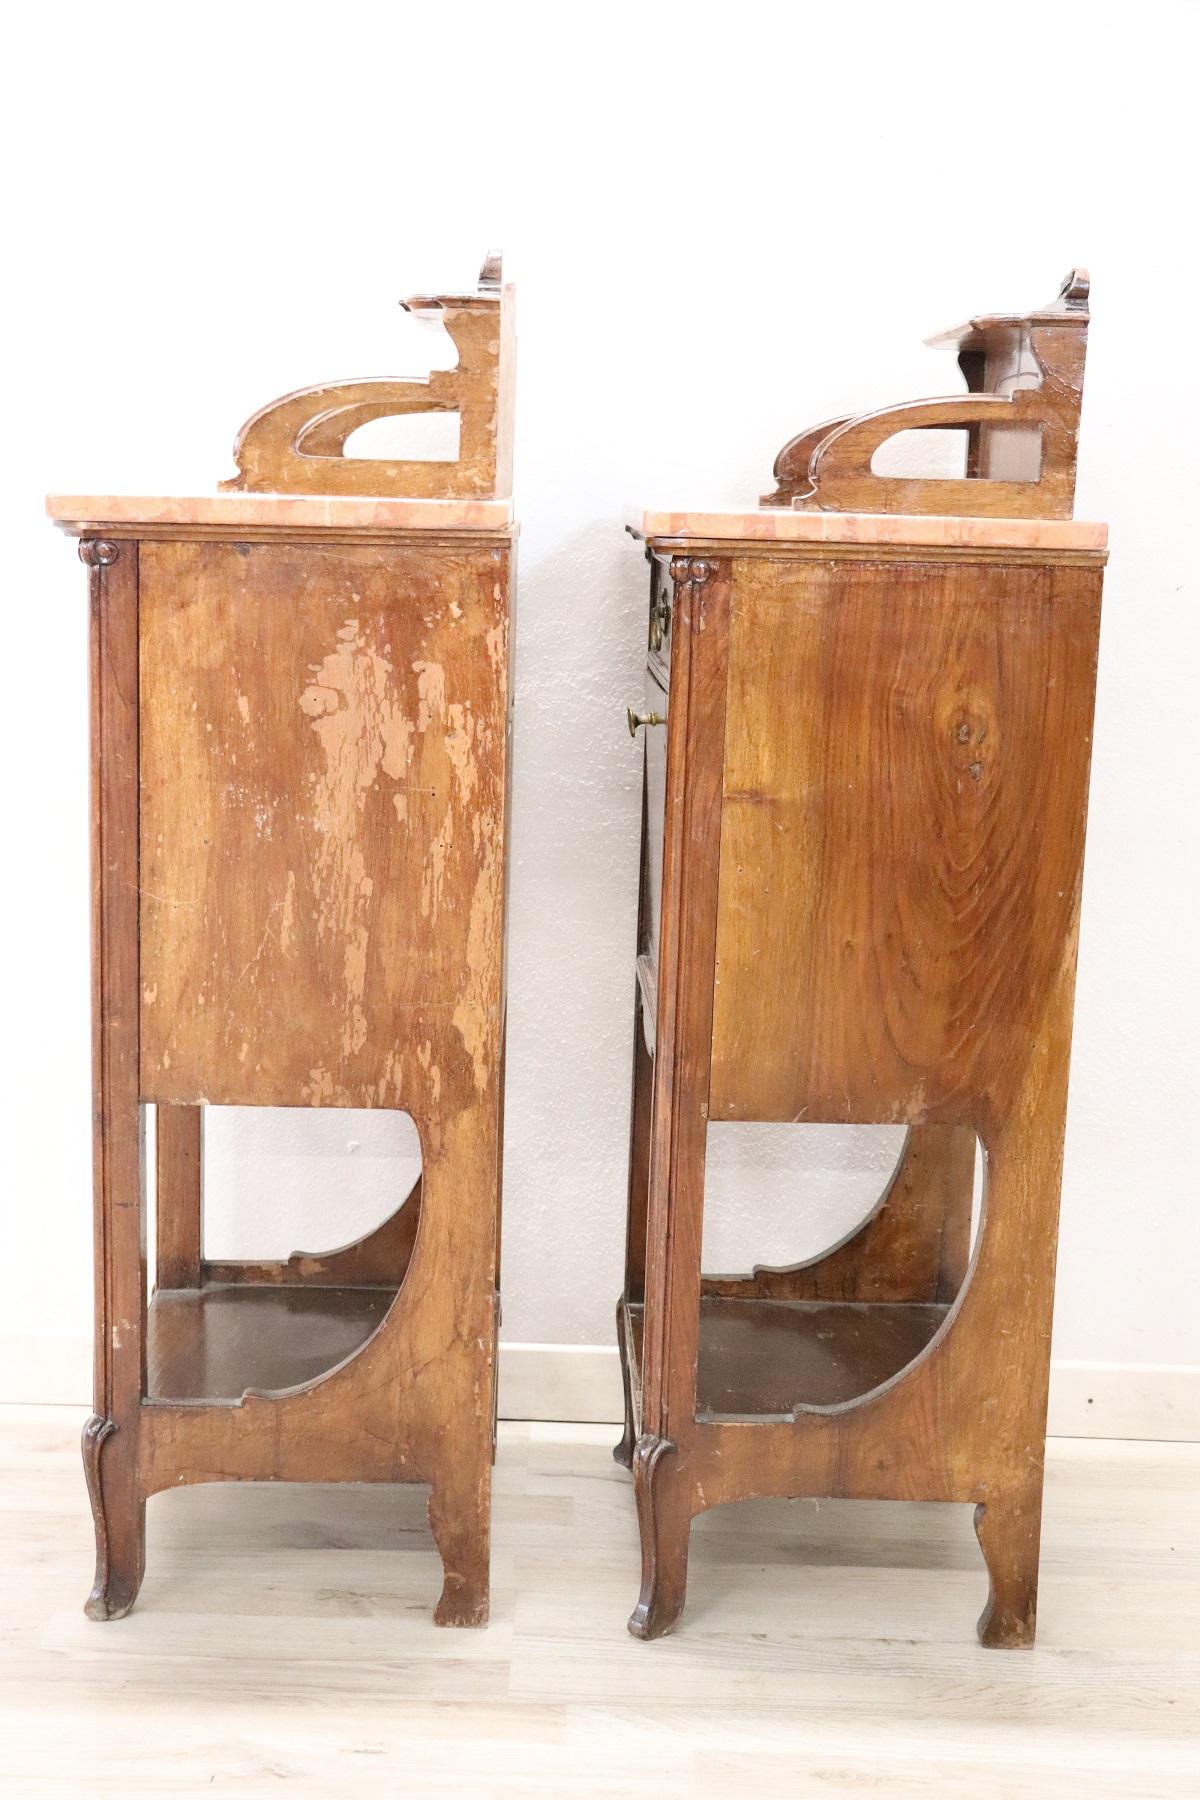 Rare and fine quality Italian Art Nouveau antique pair of nightstand, 1800s. The bedside tables are in precious walnut wood with a red marble top. The general line is moved as the Art Nouveau taste wanted. On the front, delicate floral decoration